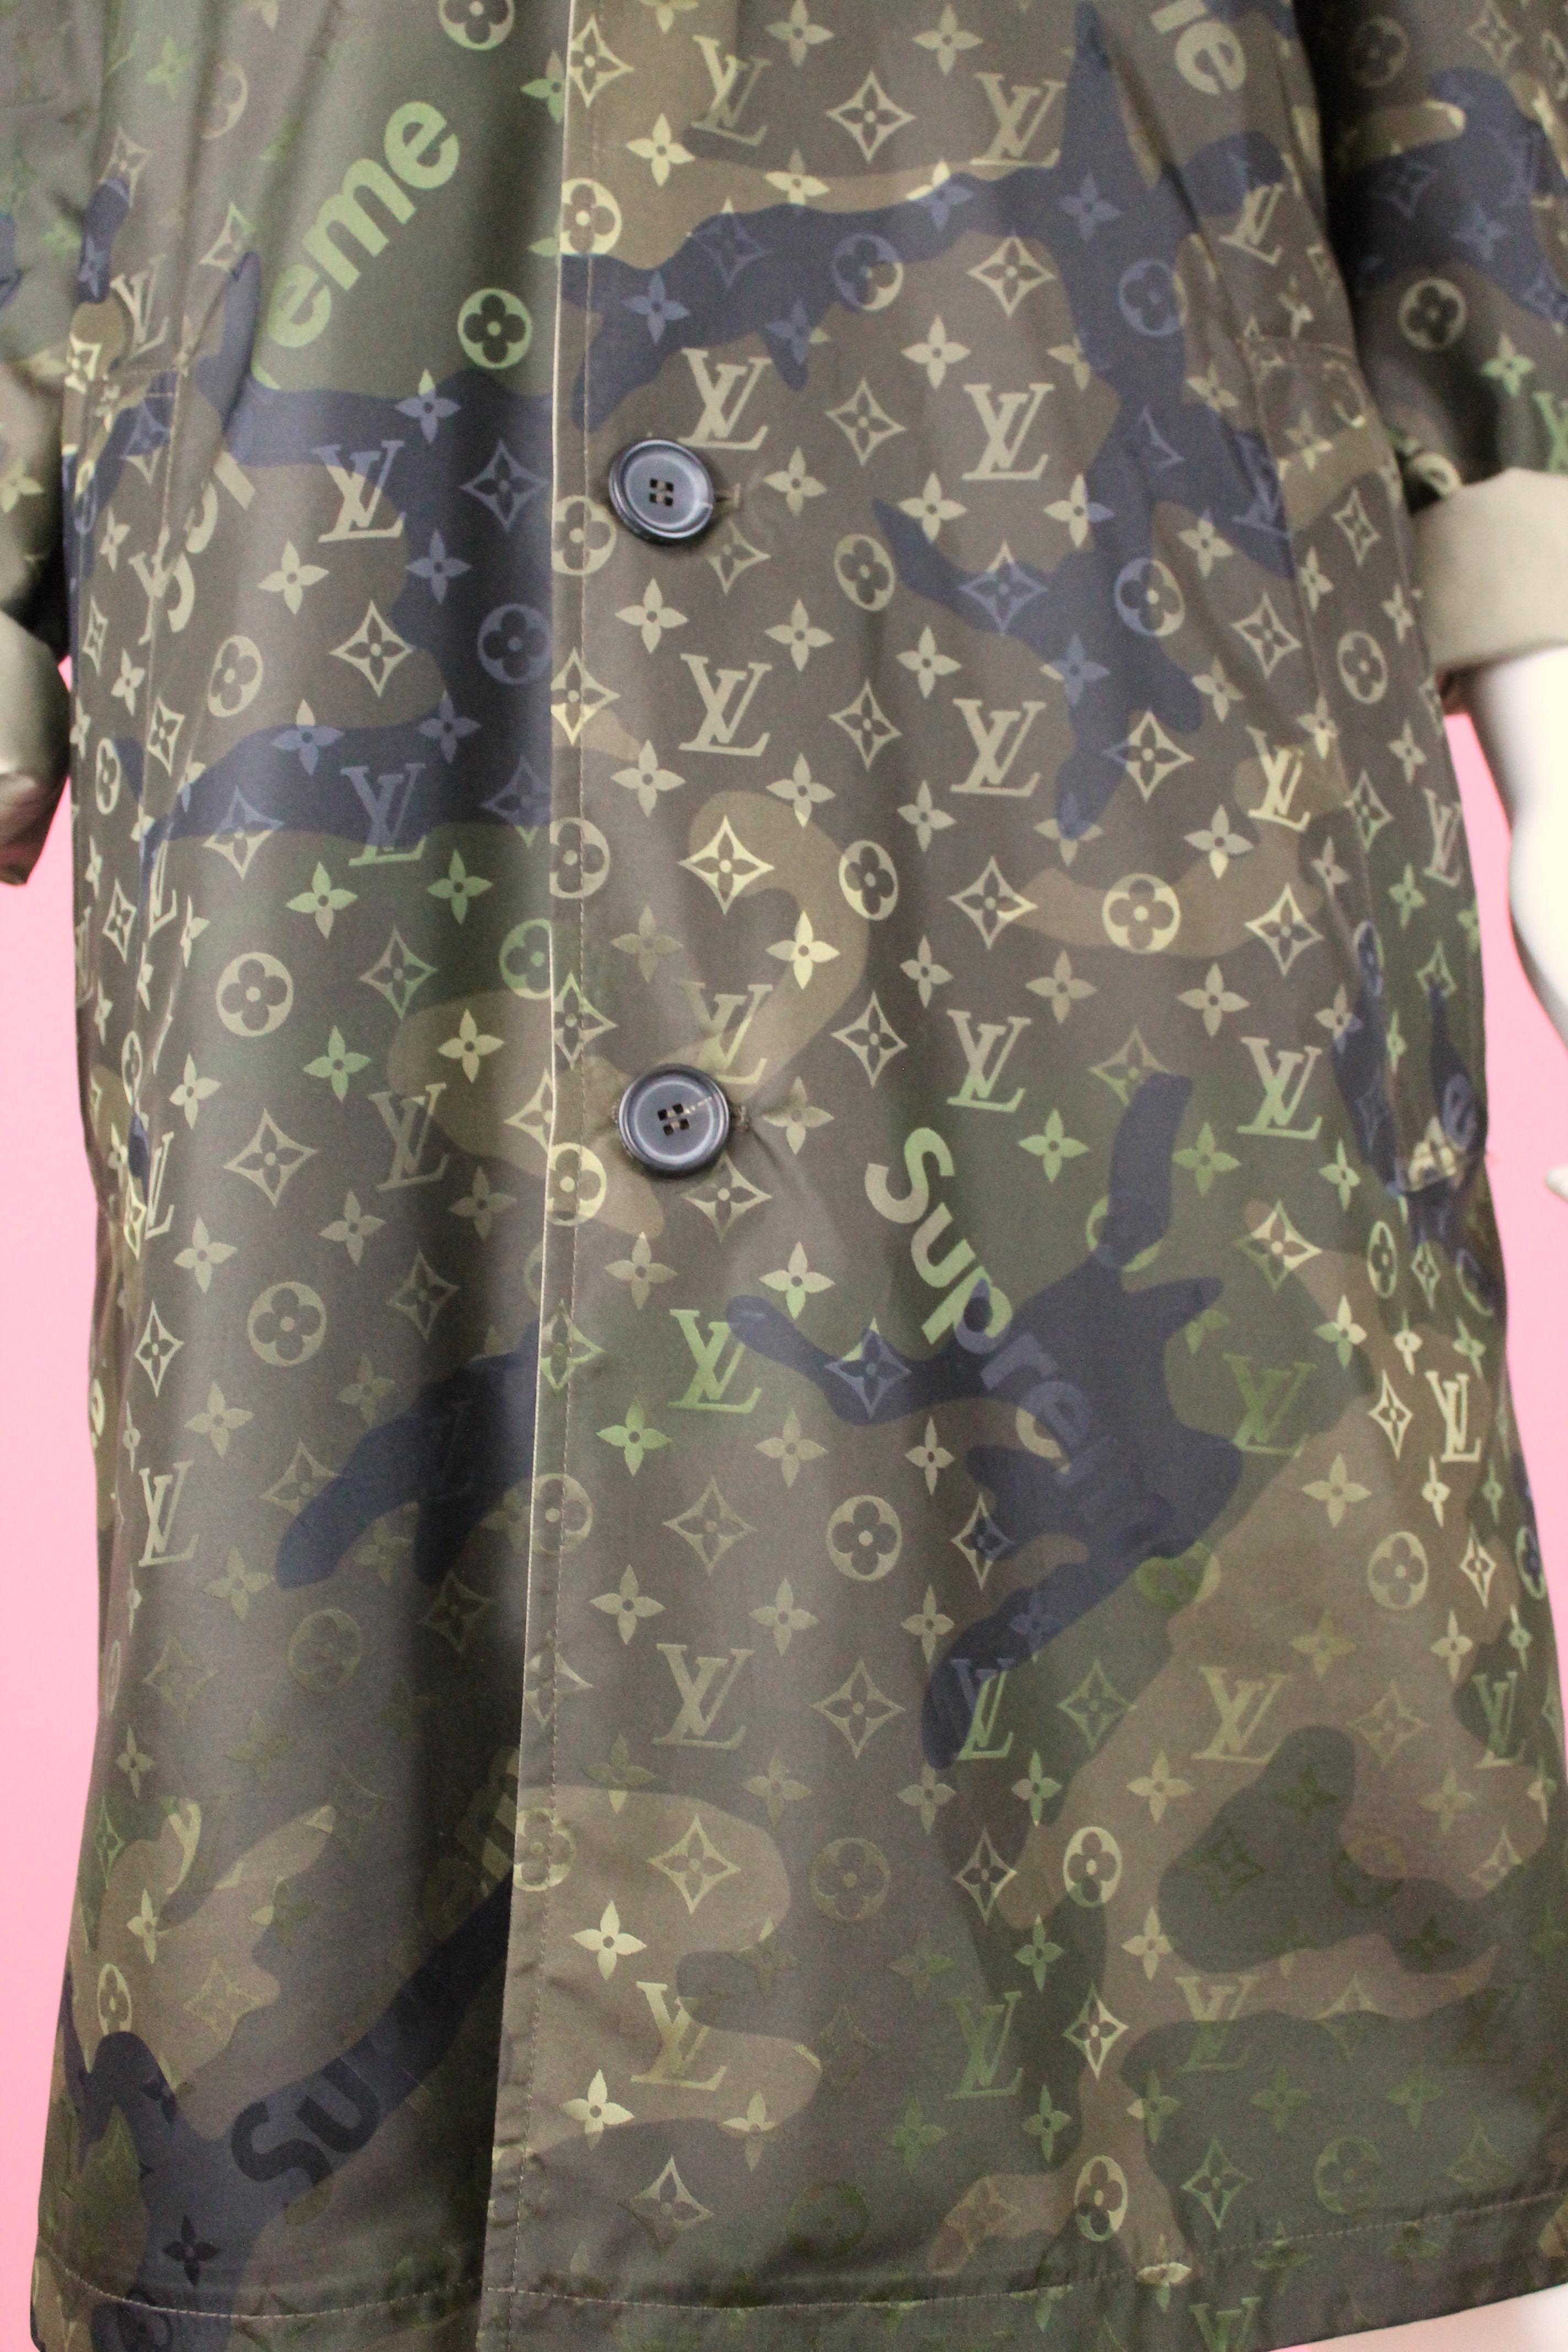 -Incredibly rare and sought after trench coat from Louis Vuitton Supreme collaboration of Autumn Winter 2017
-Trench is reversible, camouflage print features holographic LV monogram and SUPREME logo. Khaki side has underside that shows print and